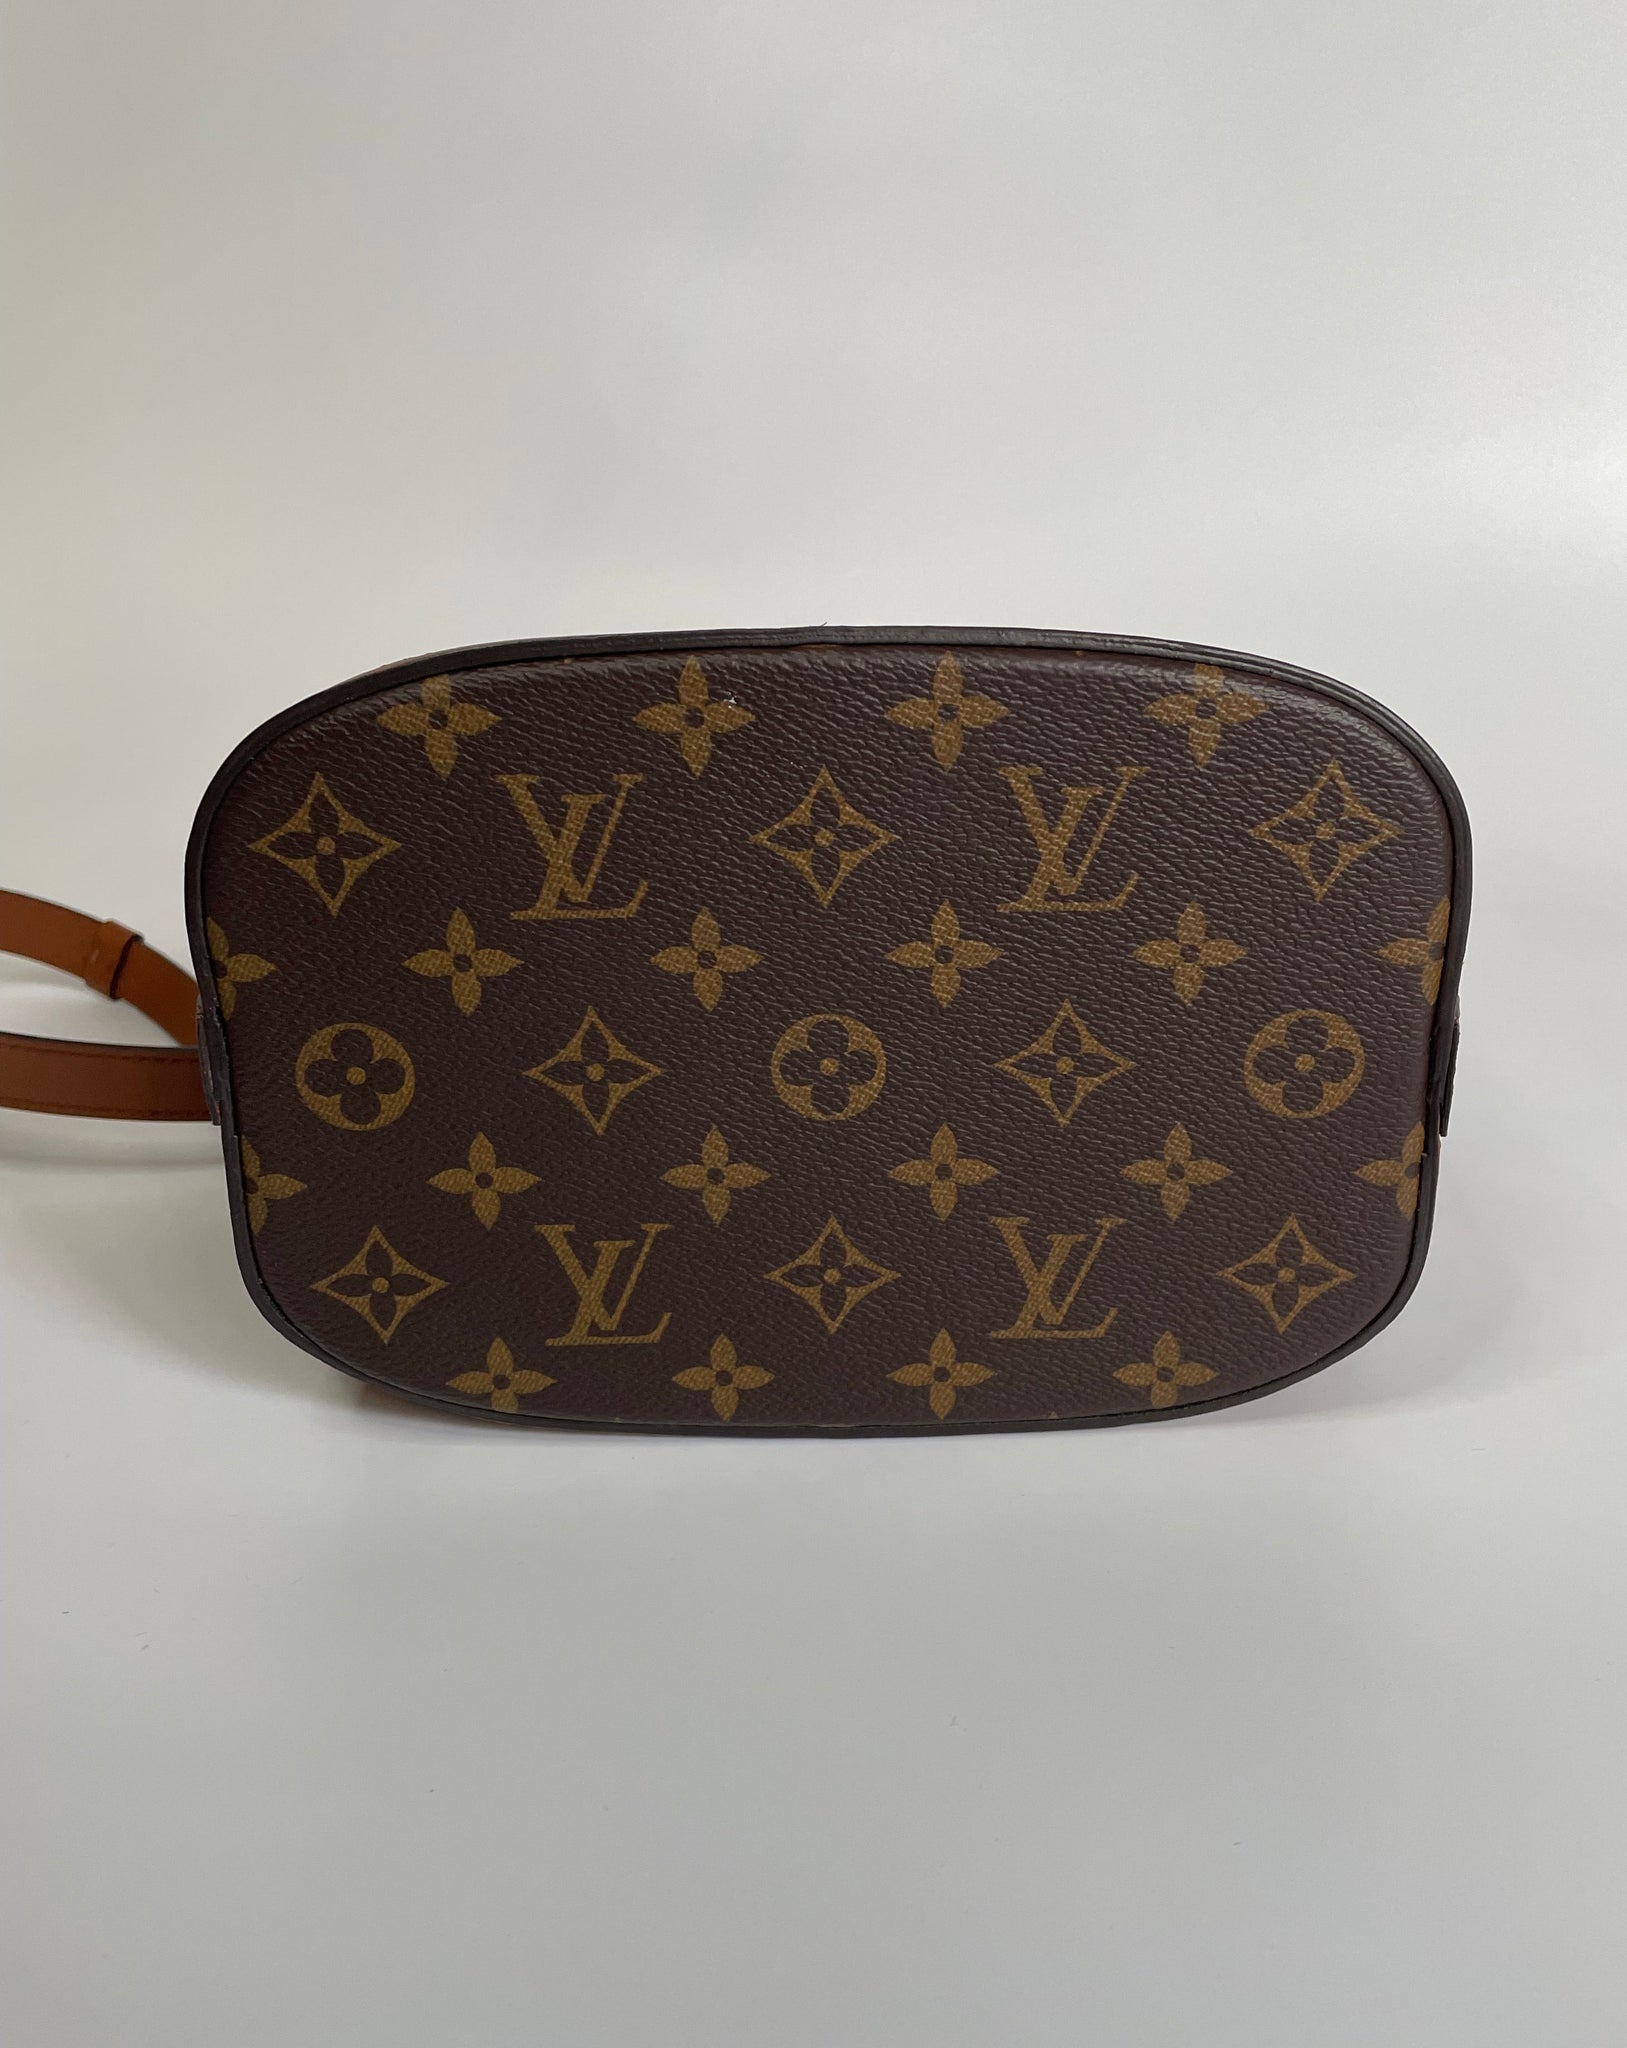 Shopybuybuybuy - Lv DAUPHINE PM BACKPACK Rm12600